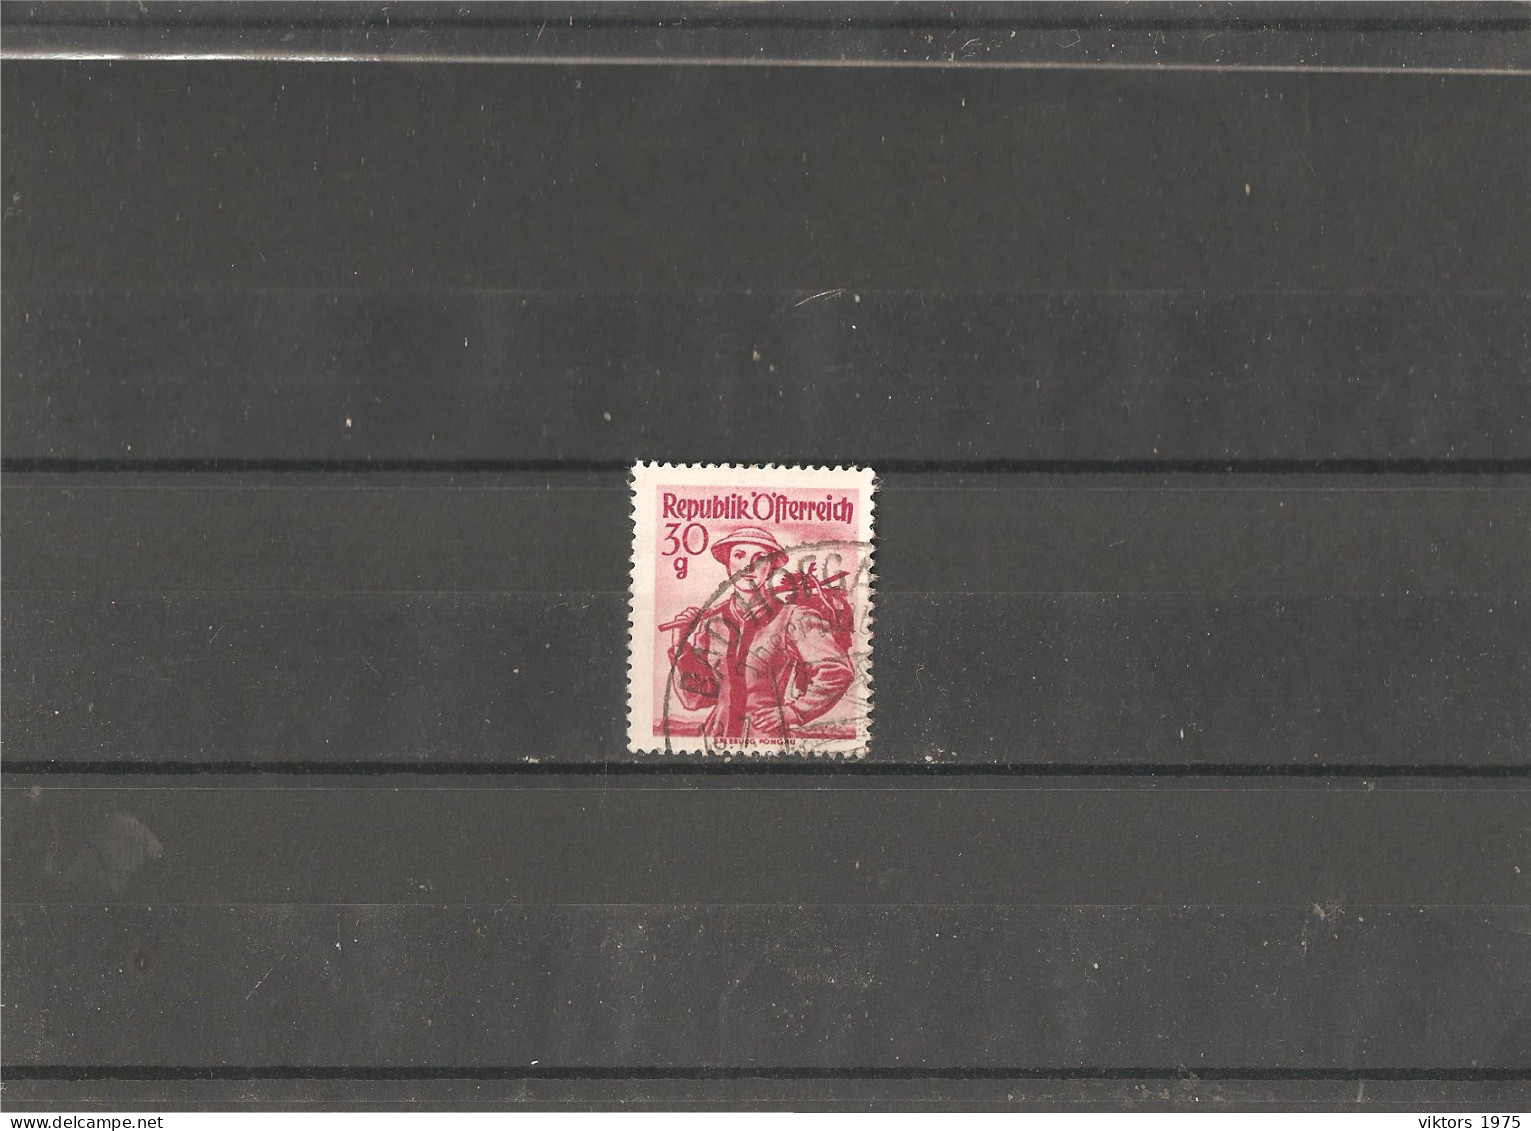 Used Stamp Nr.899 In MICHEL Catalog - Used Stamps